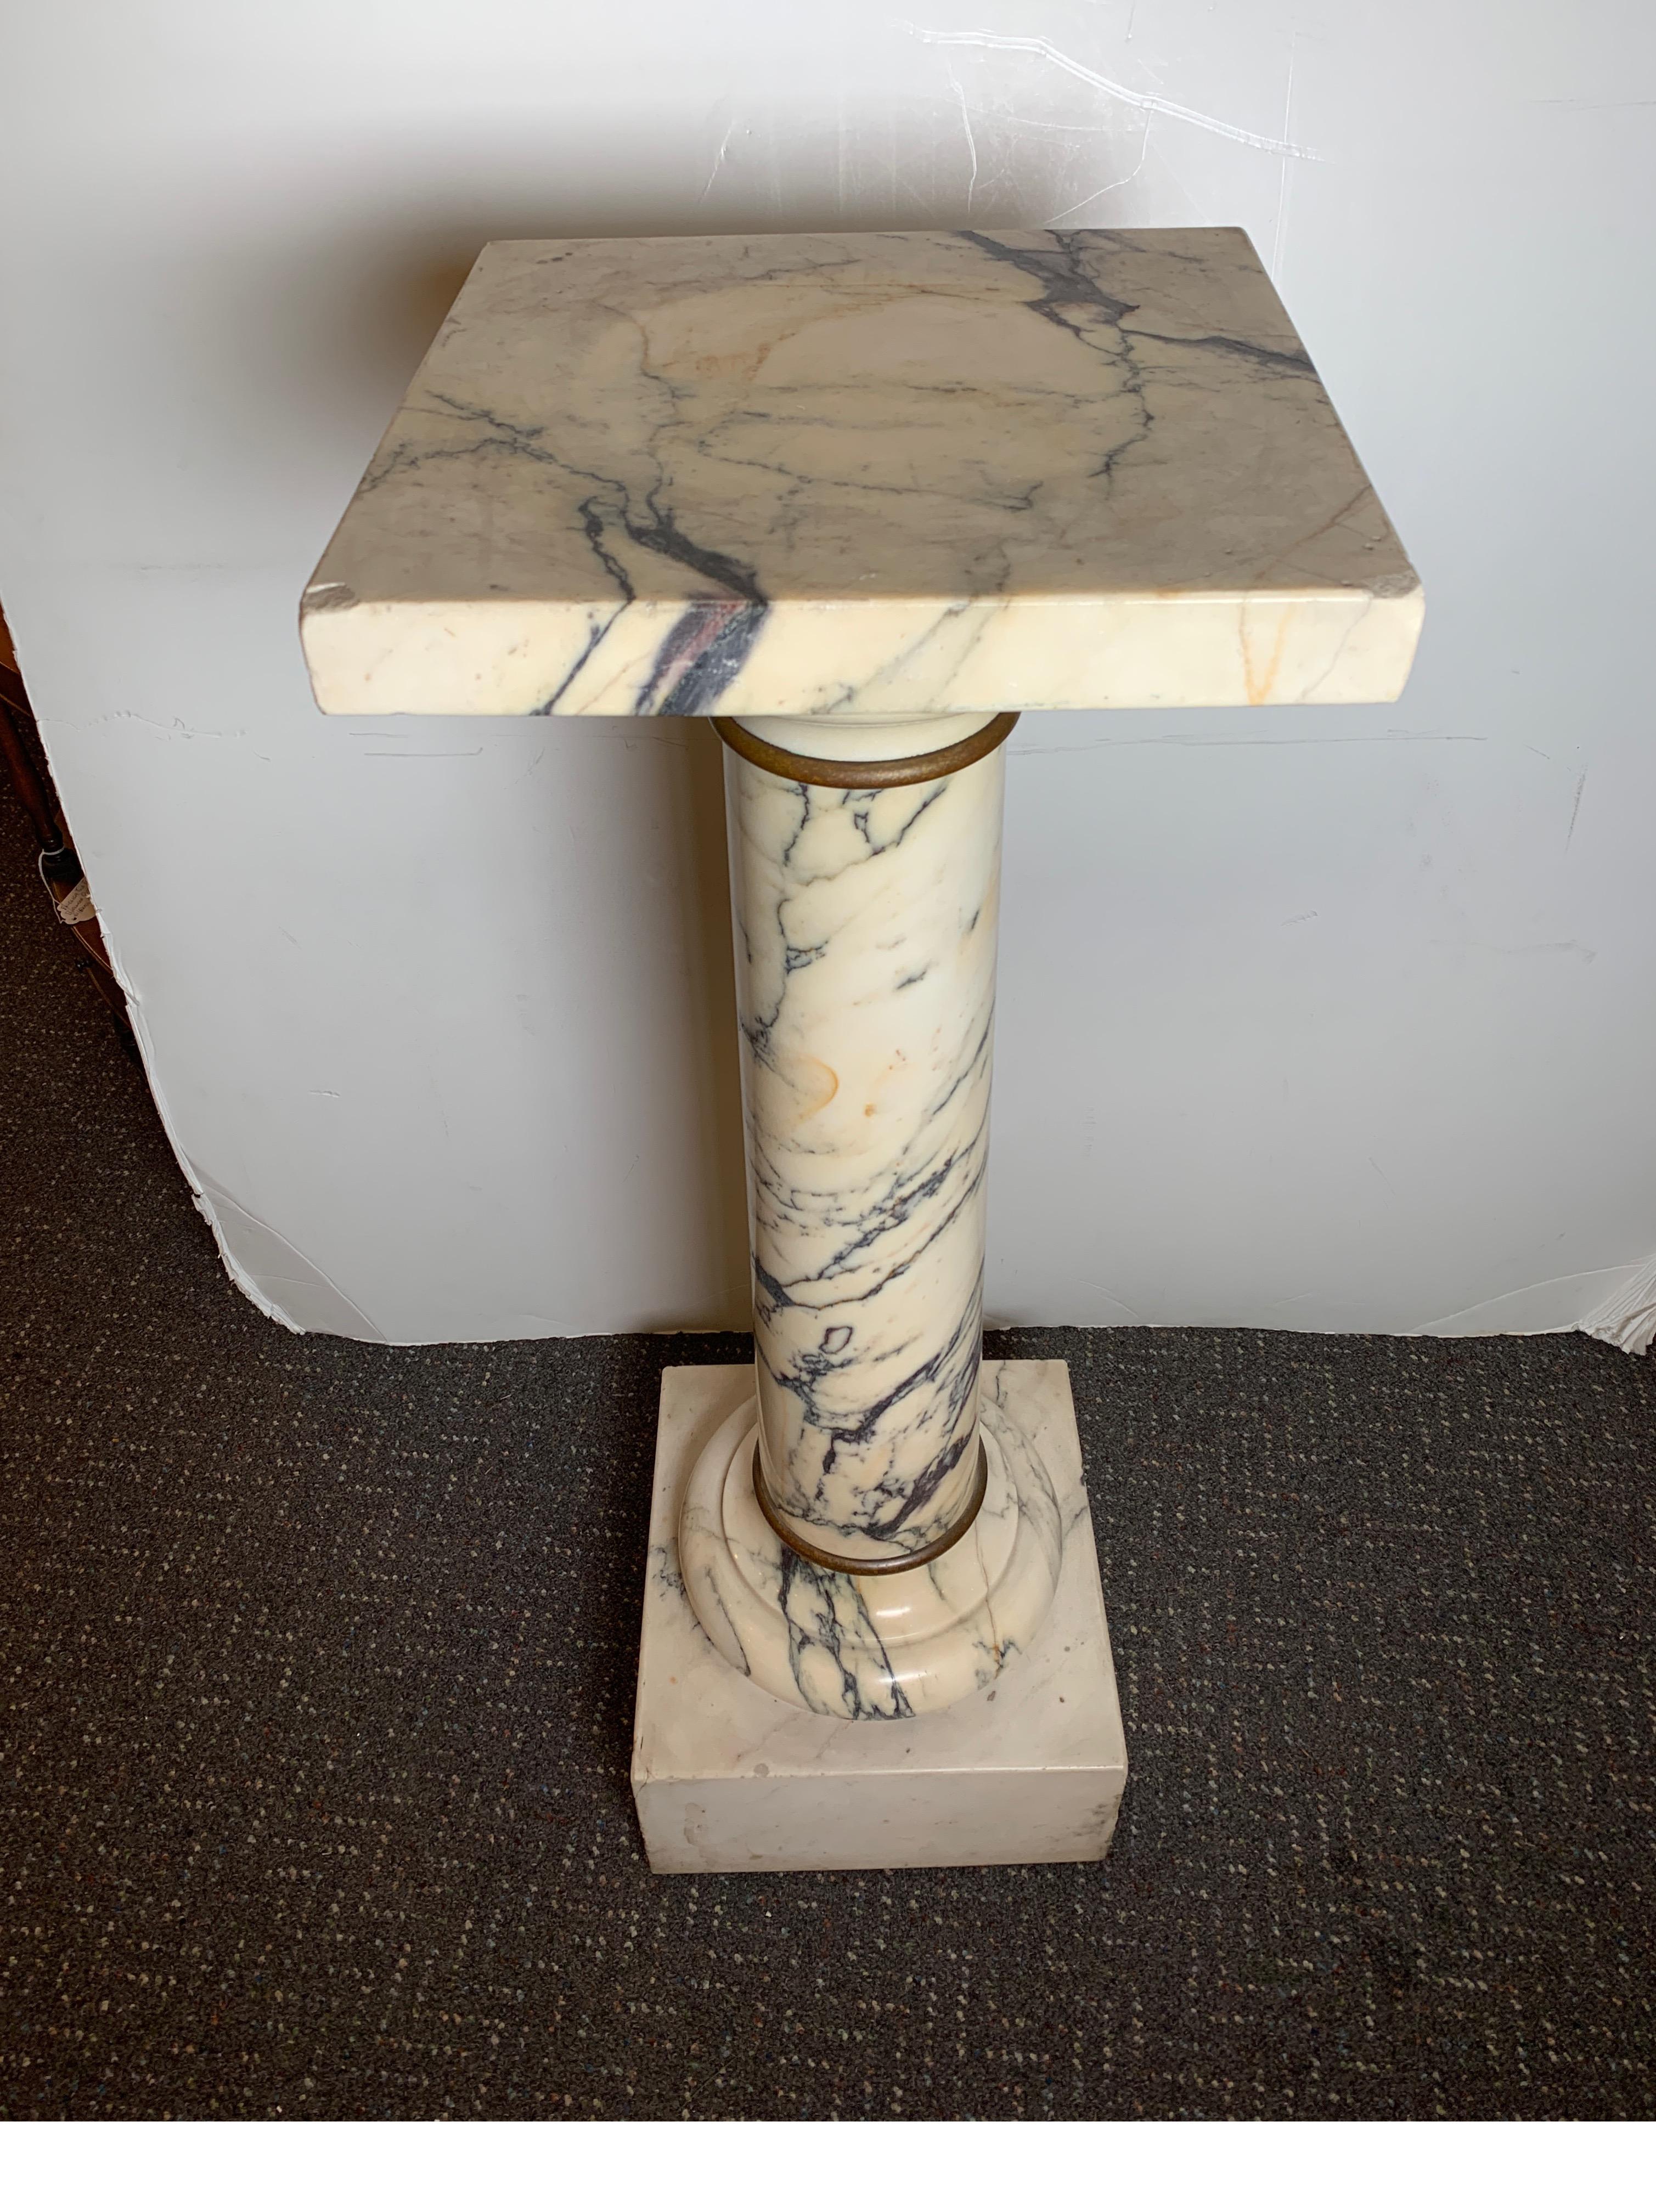 Traditional Italian Marble Pedestal W/ Simple Bronze Ring Accents, circa 1890s.
Nice size and weight to accommodate heavy sculptures
Dimensions: 37